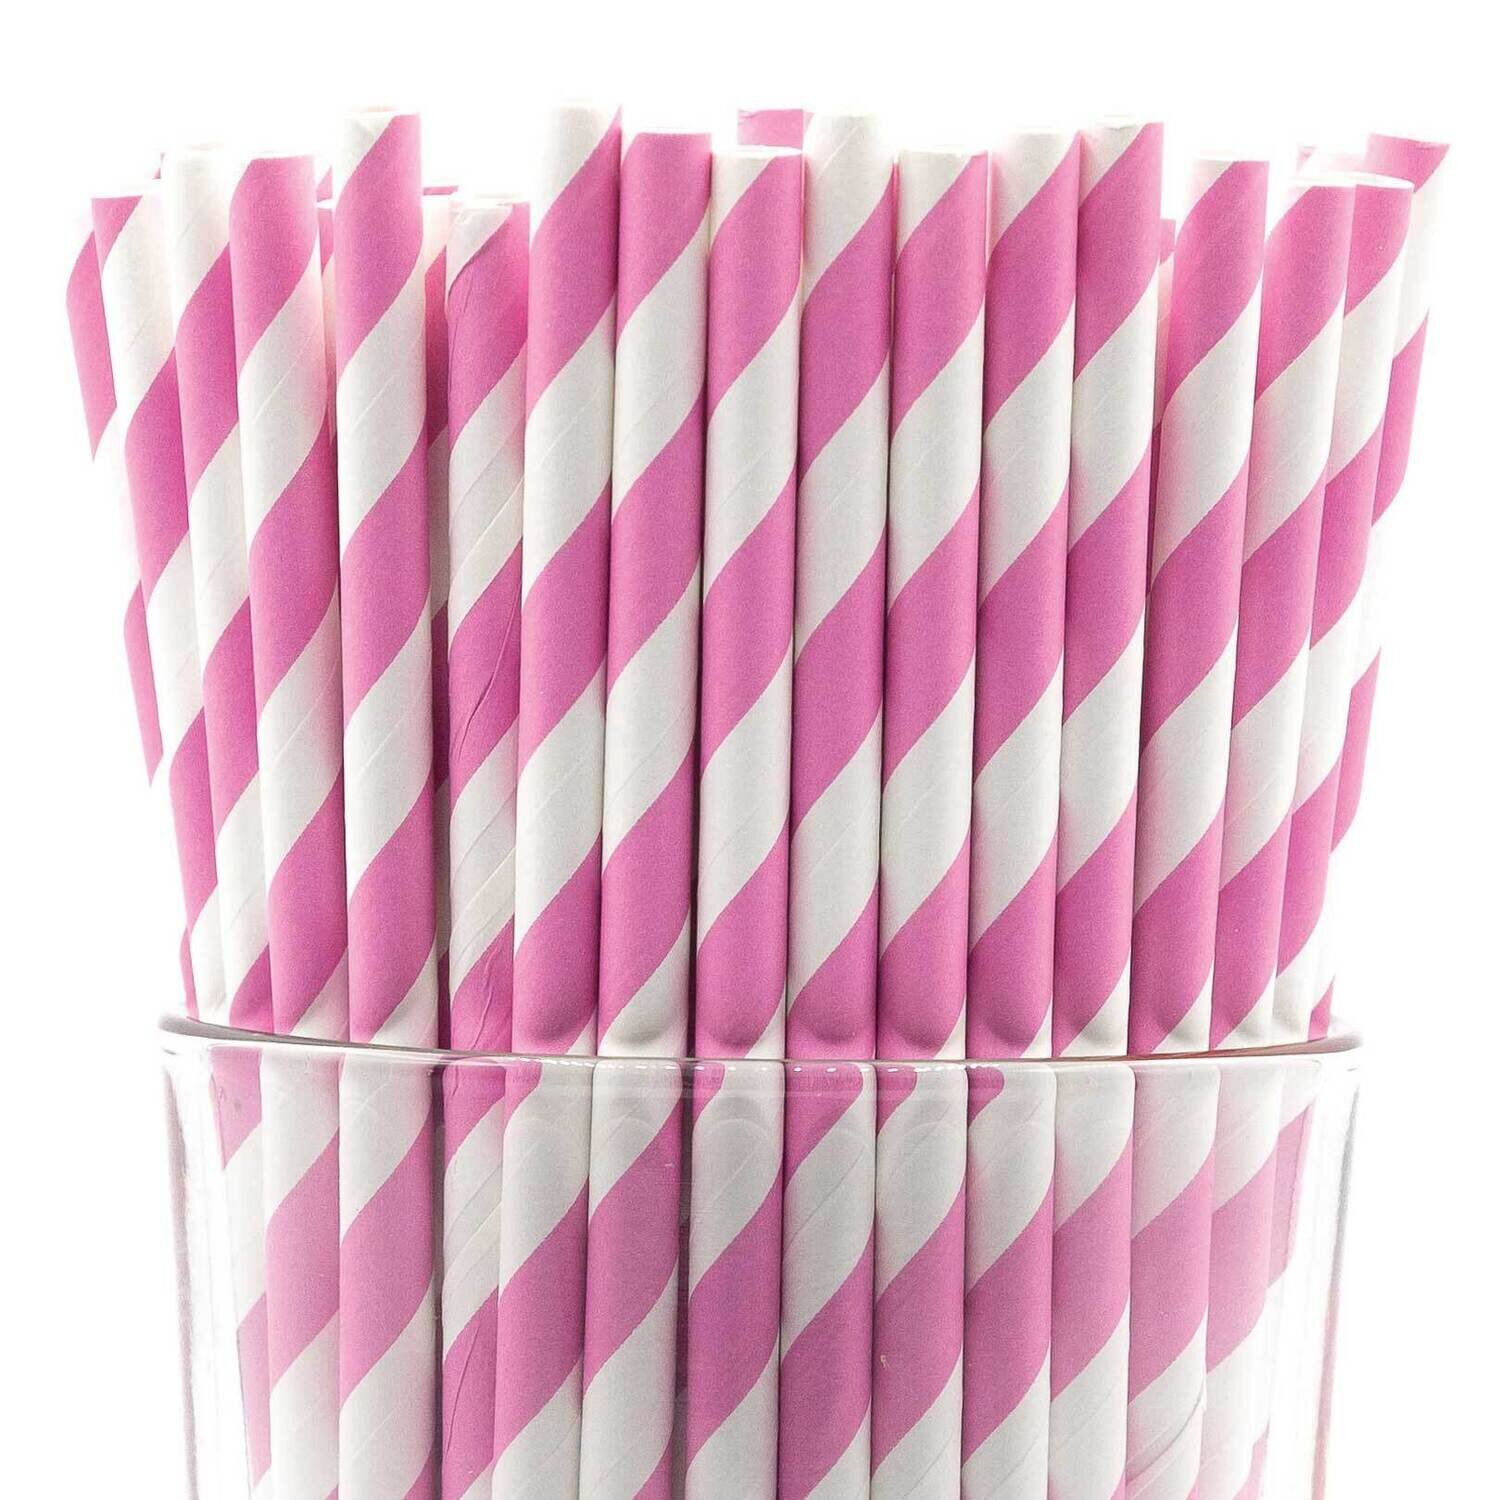 Pack of 150 Pink Wide Stripe Bio-degradable Paper Straws GM22627